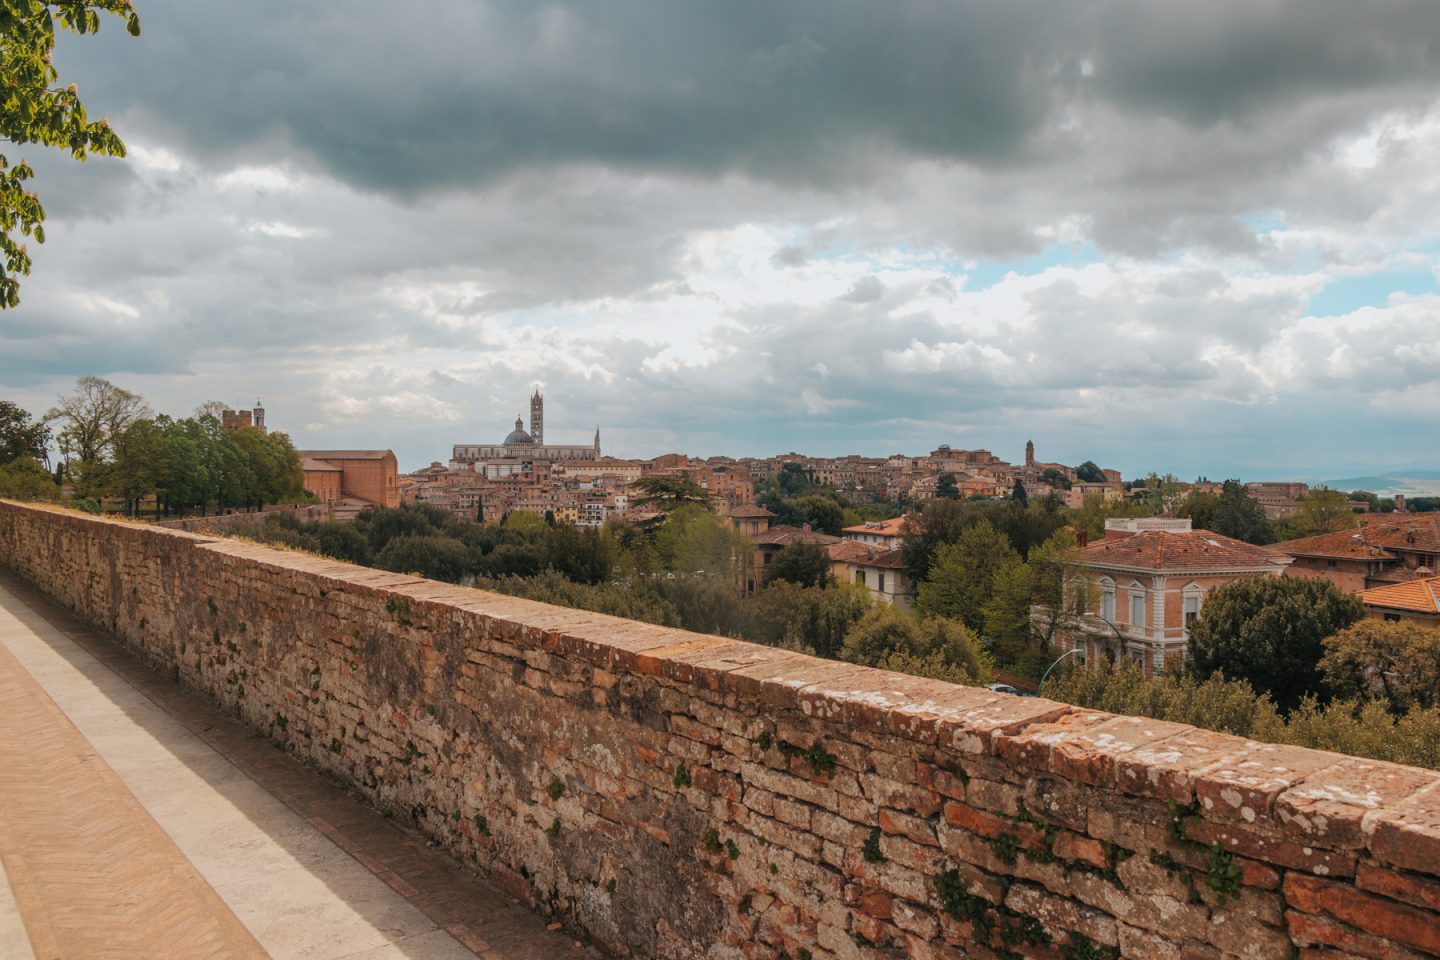 View of Siena, Italy from Medici Fortress